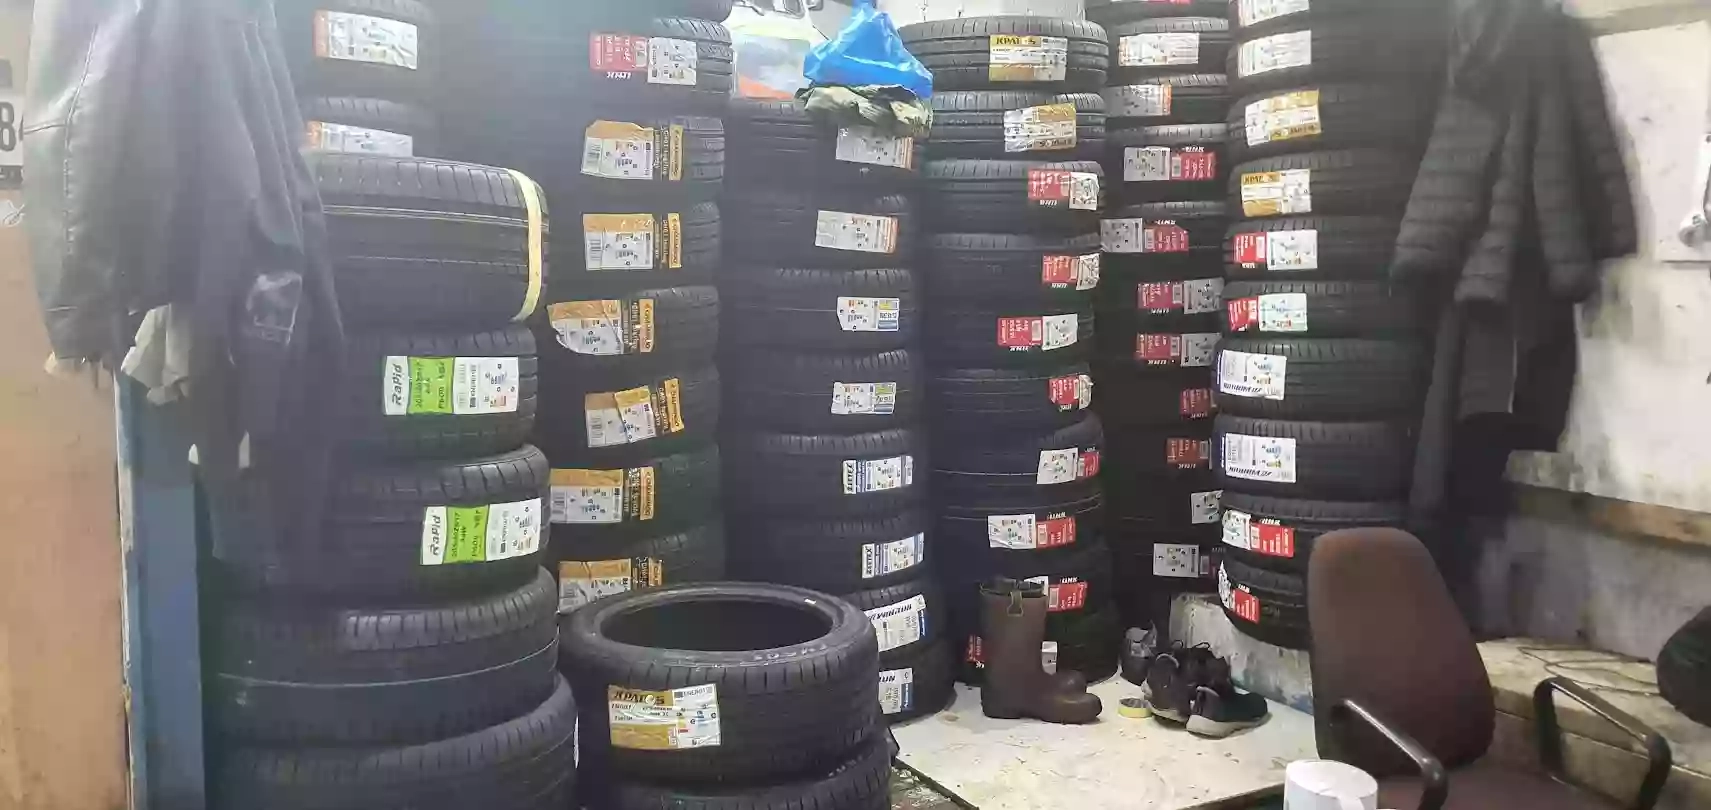 Dhmaid 2 Tyre service